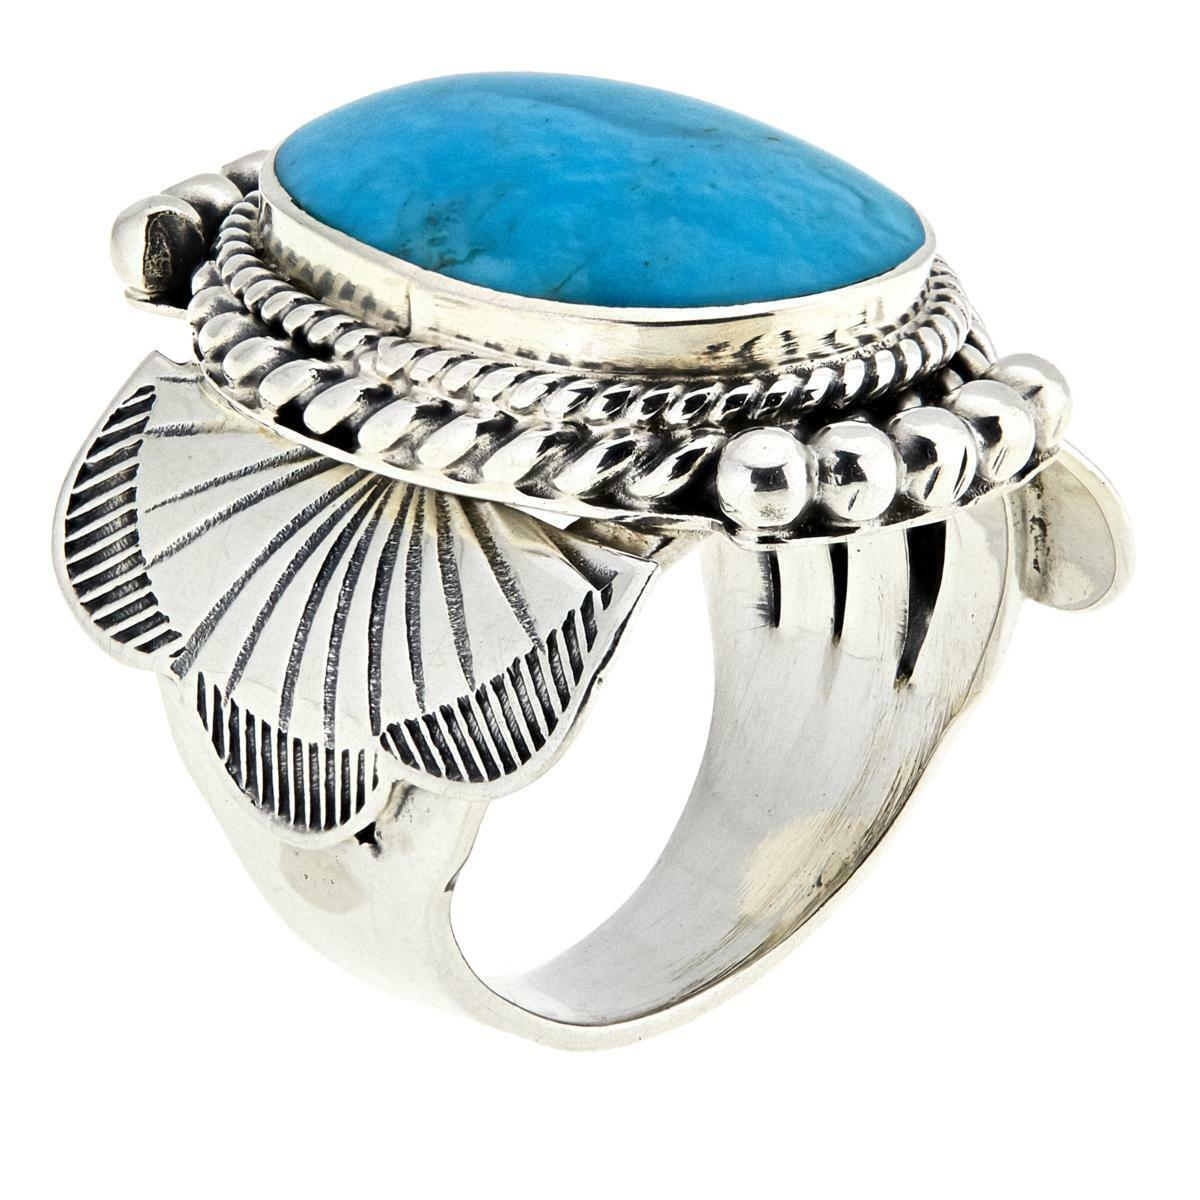 Chaco Canyon Kingman Turquoise Oval Sterling Silver Unisex Ring, Size 7